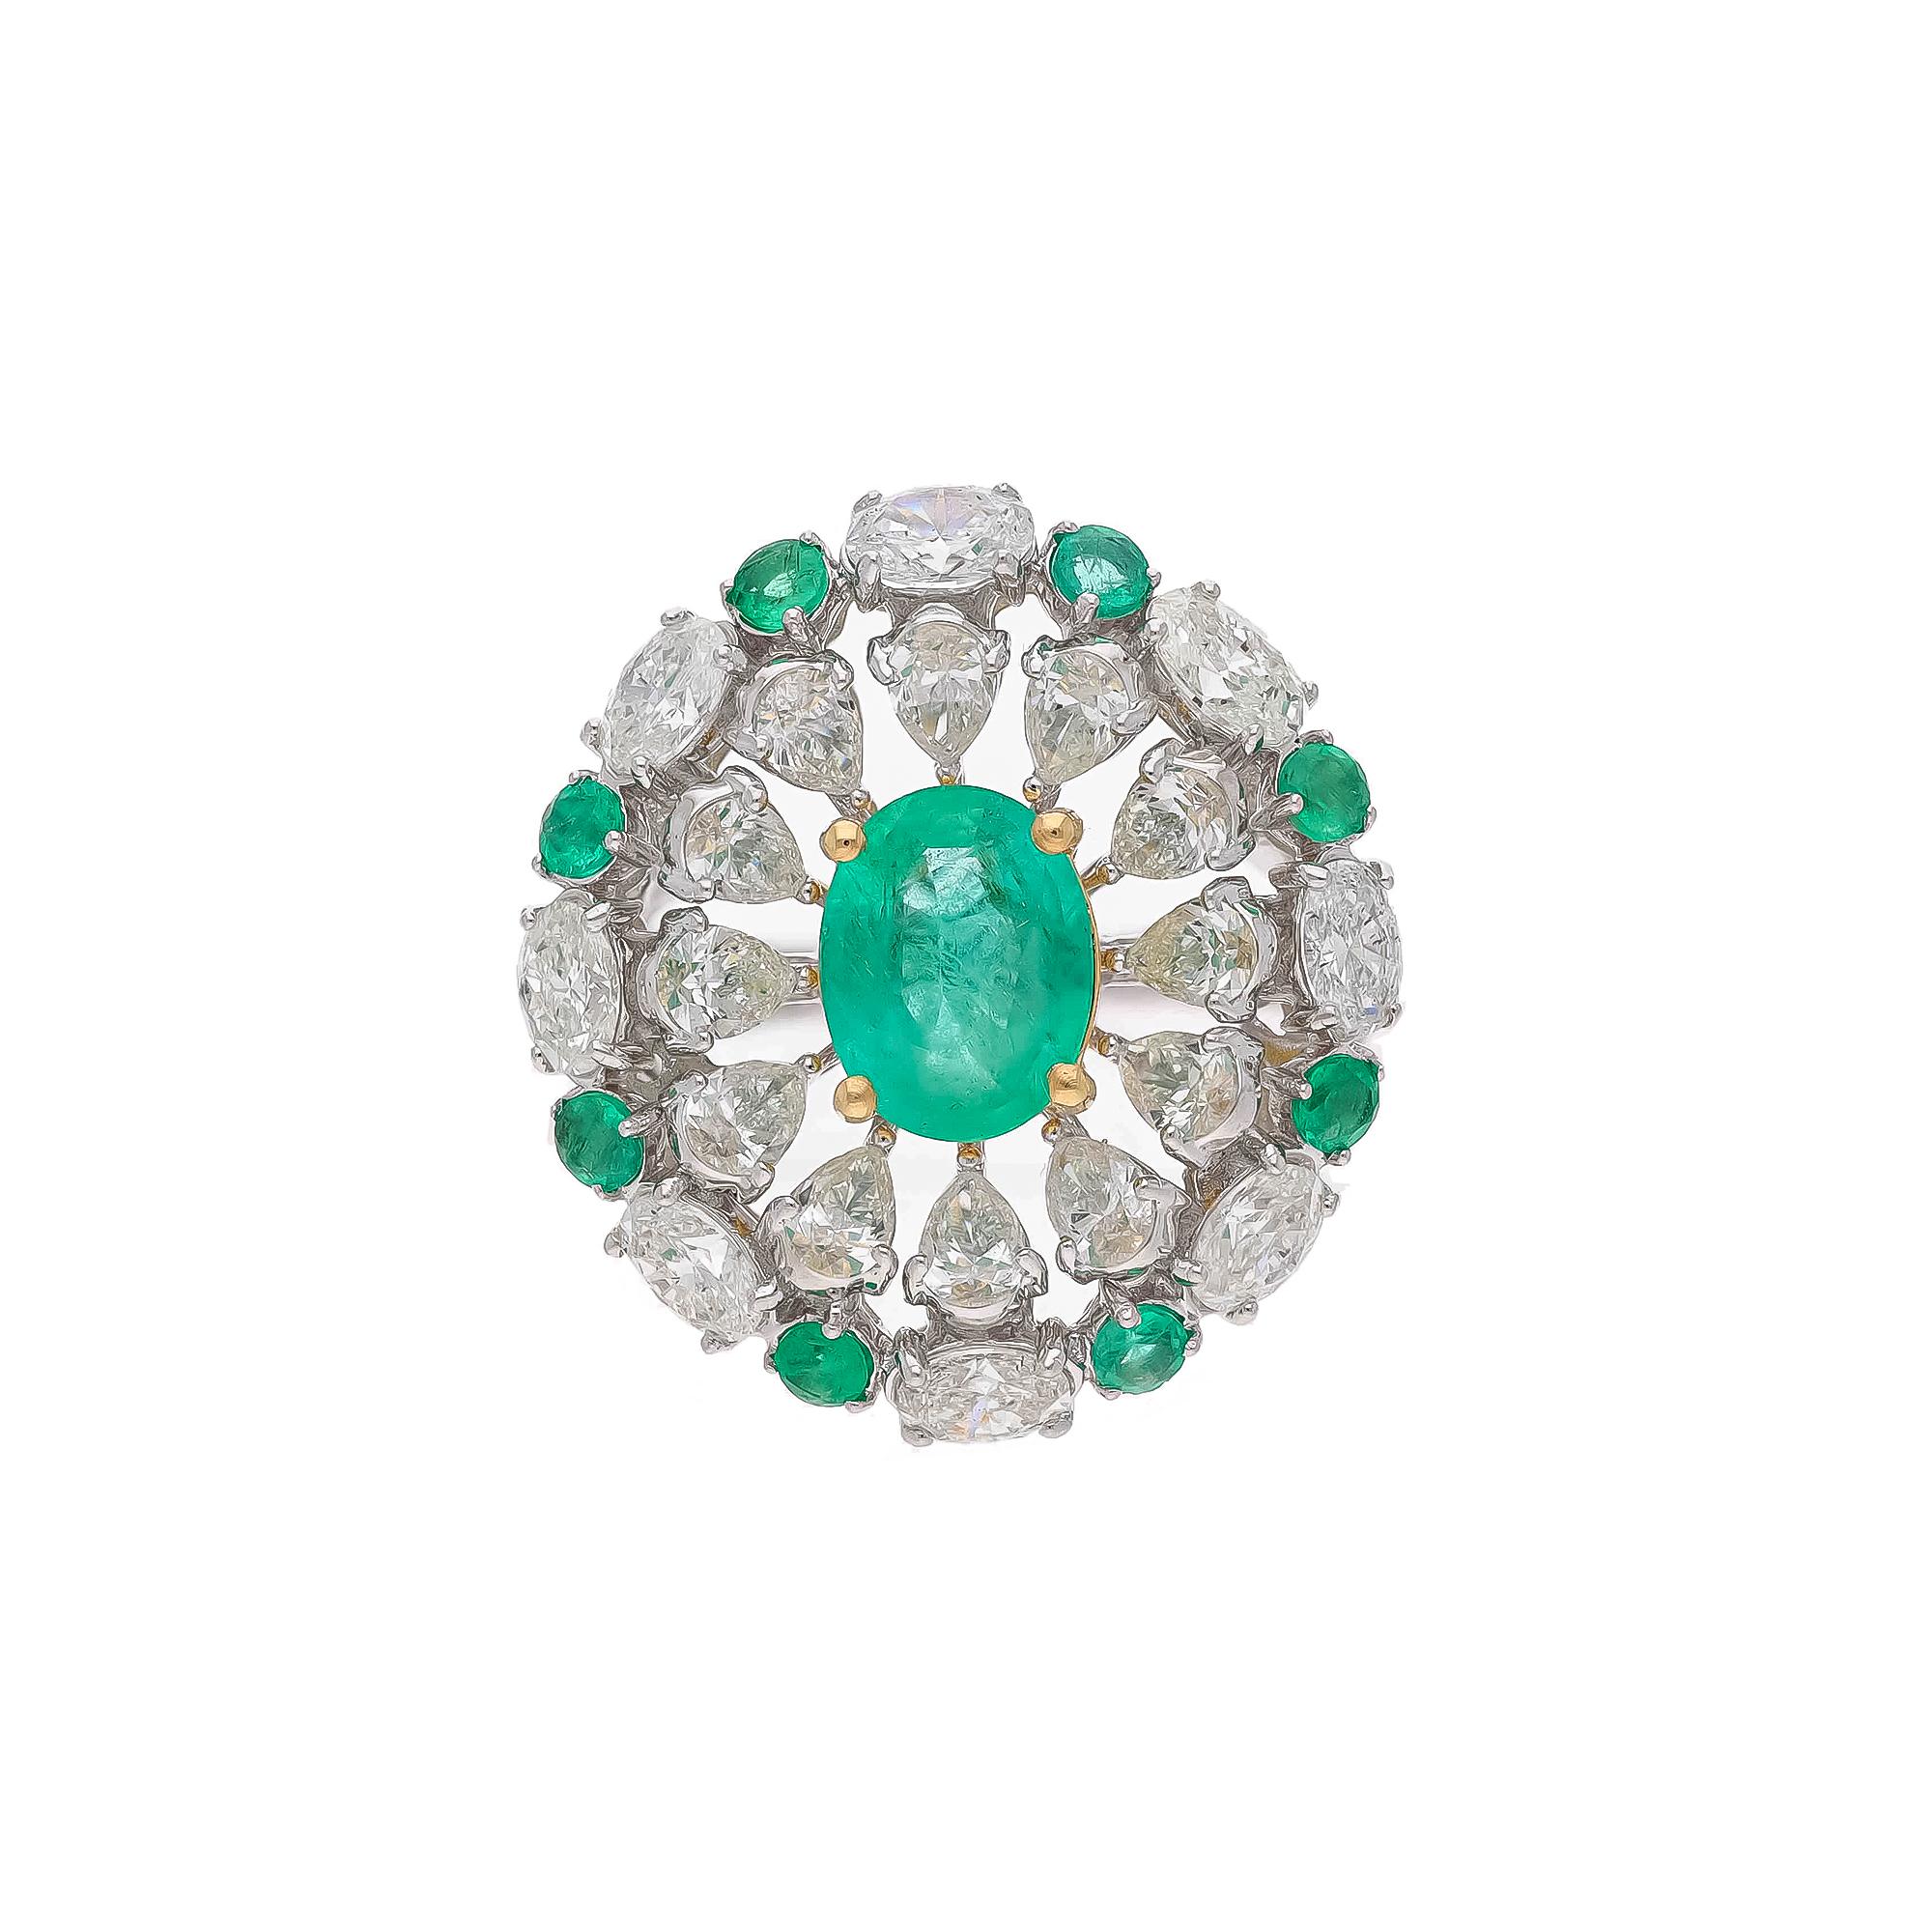 Diamonds : 3.59 carats
Emerald : 1.97carats
Gold : 8.53 gm( 18k)

This is a beautiful natural Columbian ring  with very high quality emeralds and diamonds ( vsi and G colour

Its very hard to capture the true color and luster of the stone, I have